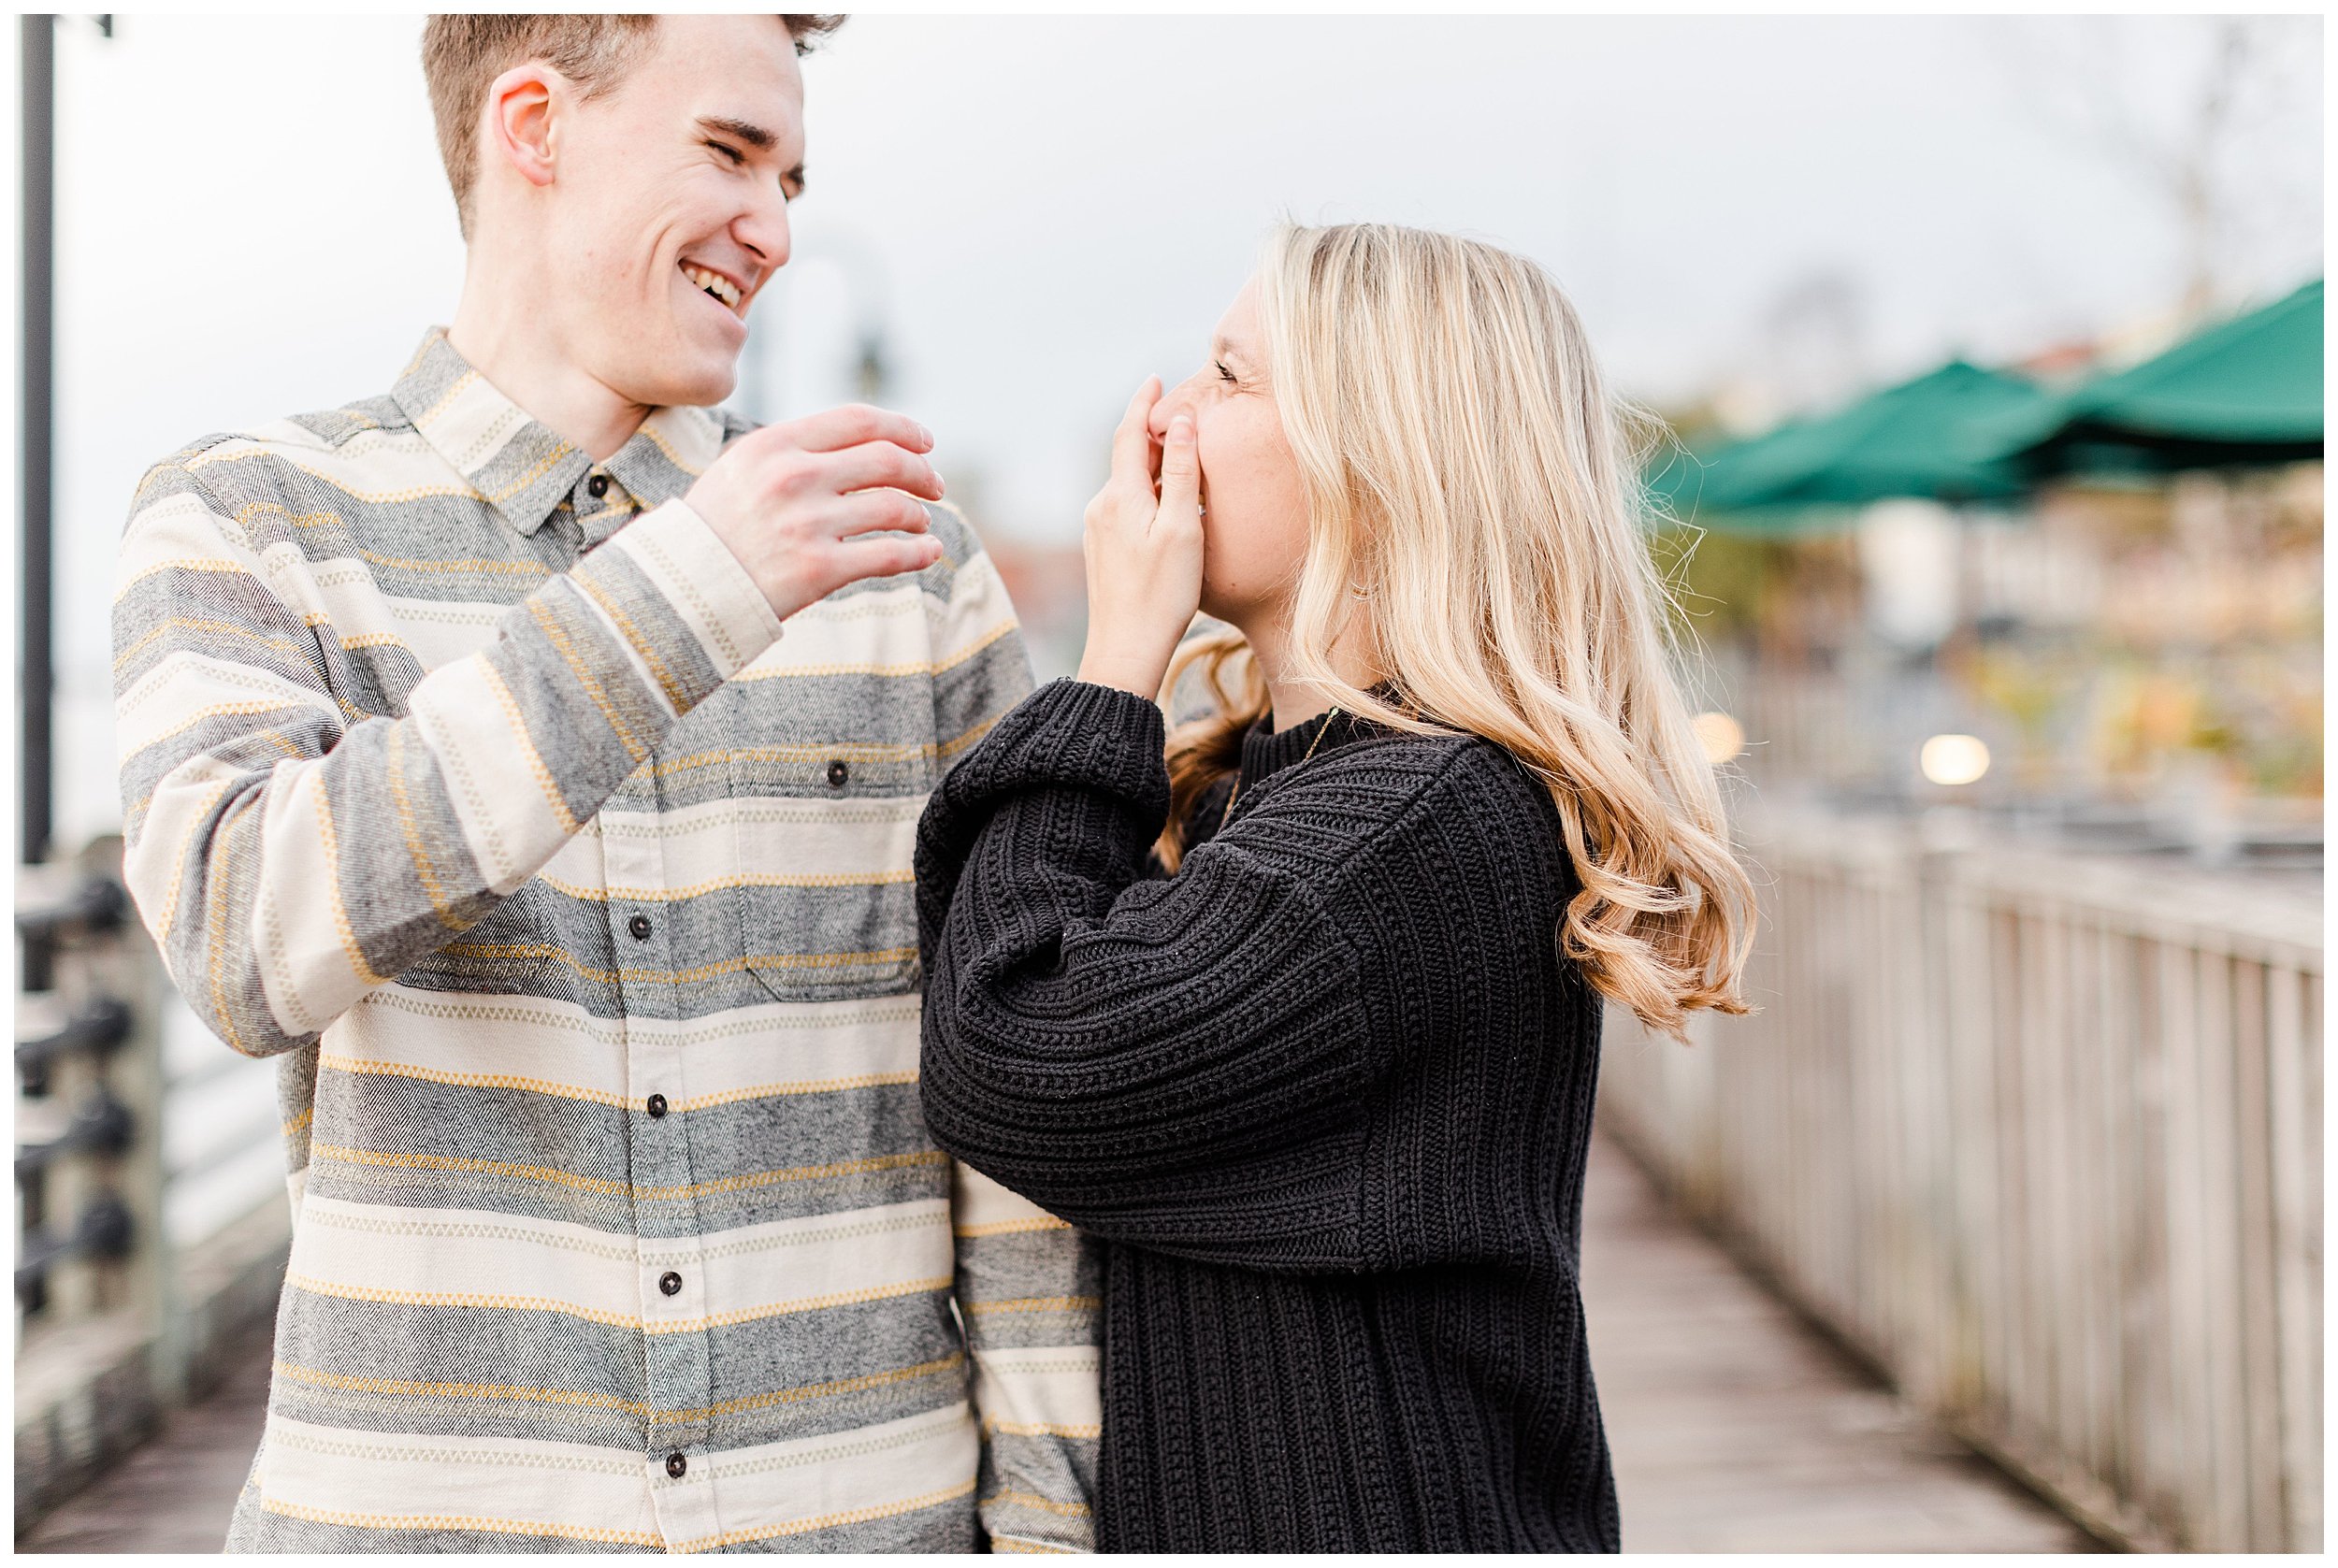 wilmington riverwalk and historic district engagement session ashley christ photography wilmington wedding photographer_0071.jpg